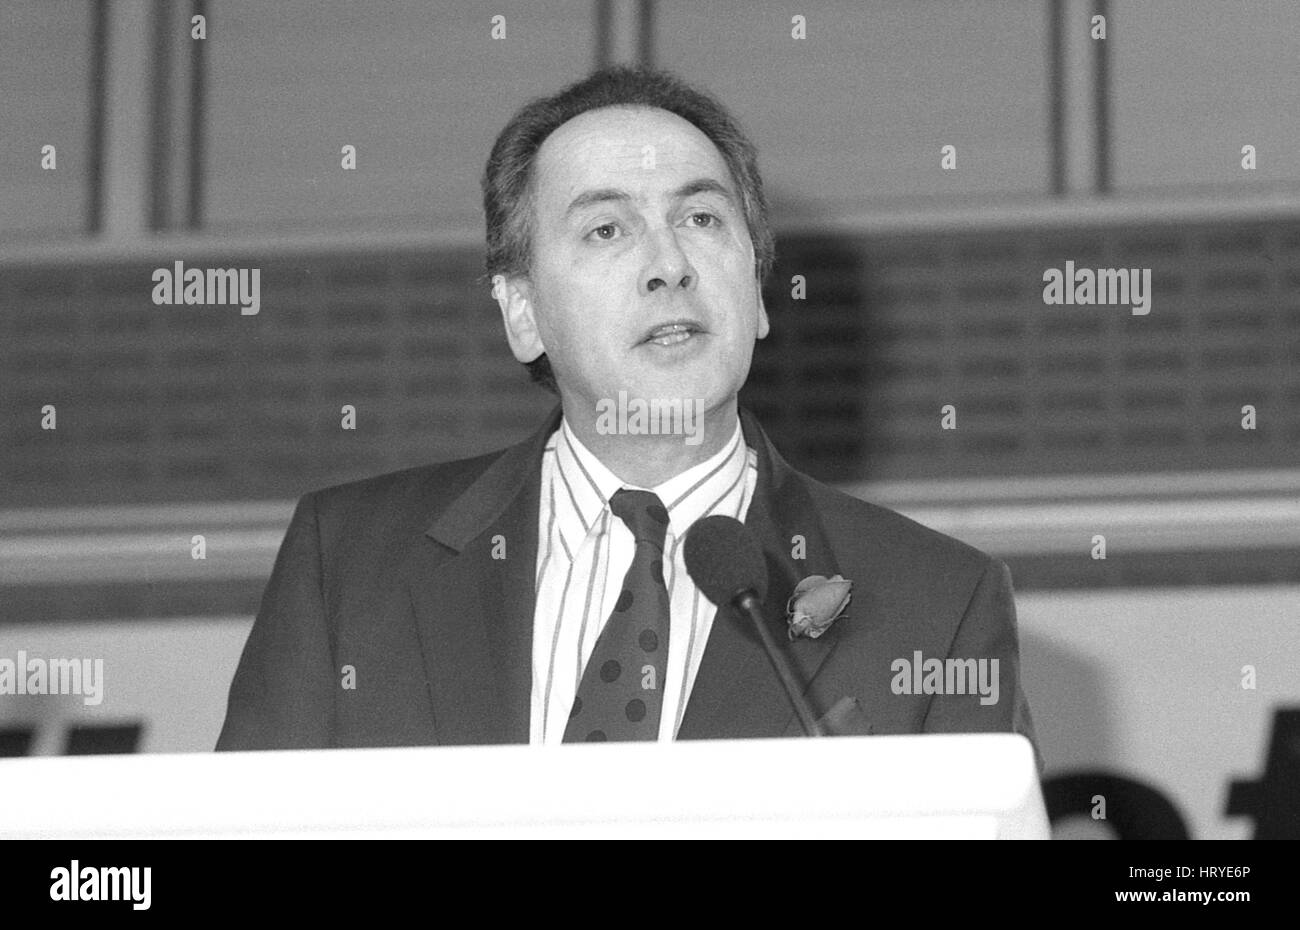 Dr. John Cunningham, Labour party Member of Parliament for Copeland, speaks at the Labour education policy launch press conference in London on December 4, 1990. Stock Photo